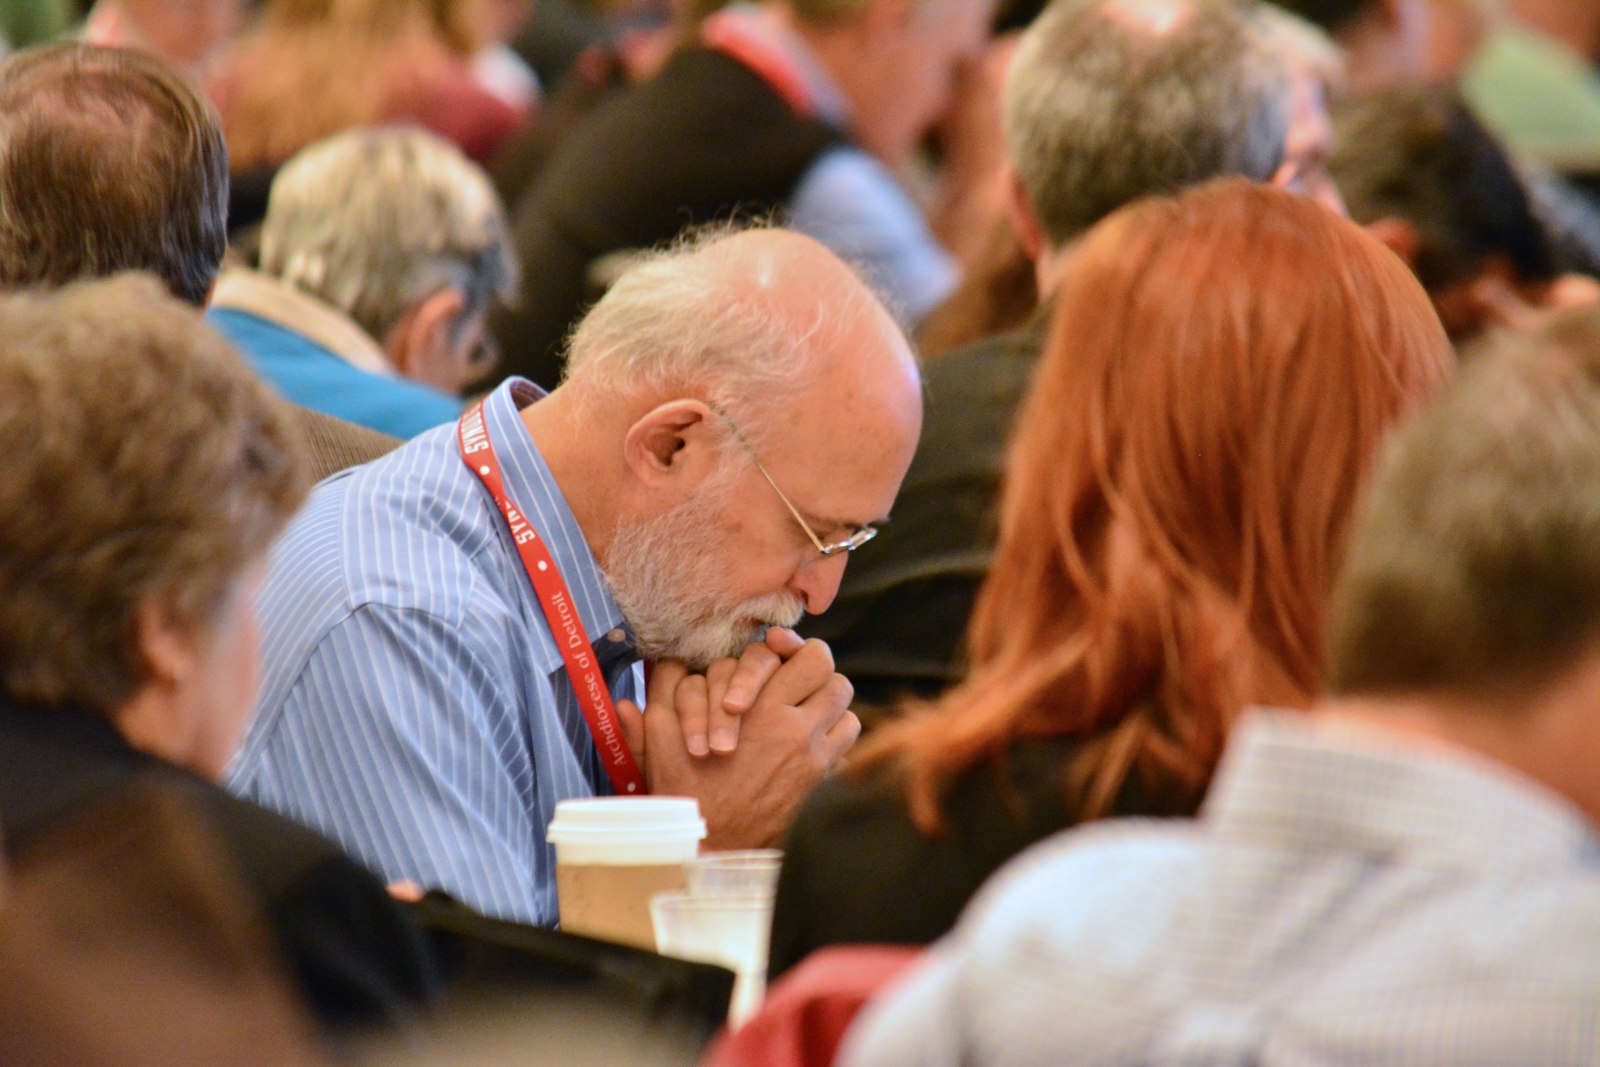 A synod member bows his head in prayer during one of the synod sessions. An emphasis on intercessory prayer, both at the parish and archdiocesan level, is one of the many lasting fruits of Synod 16, members say. (Michael Stechschulte | Detroit Catholic)